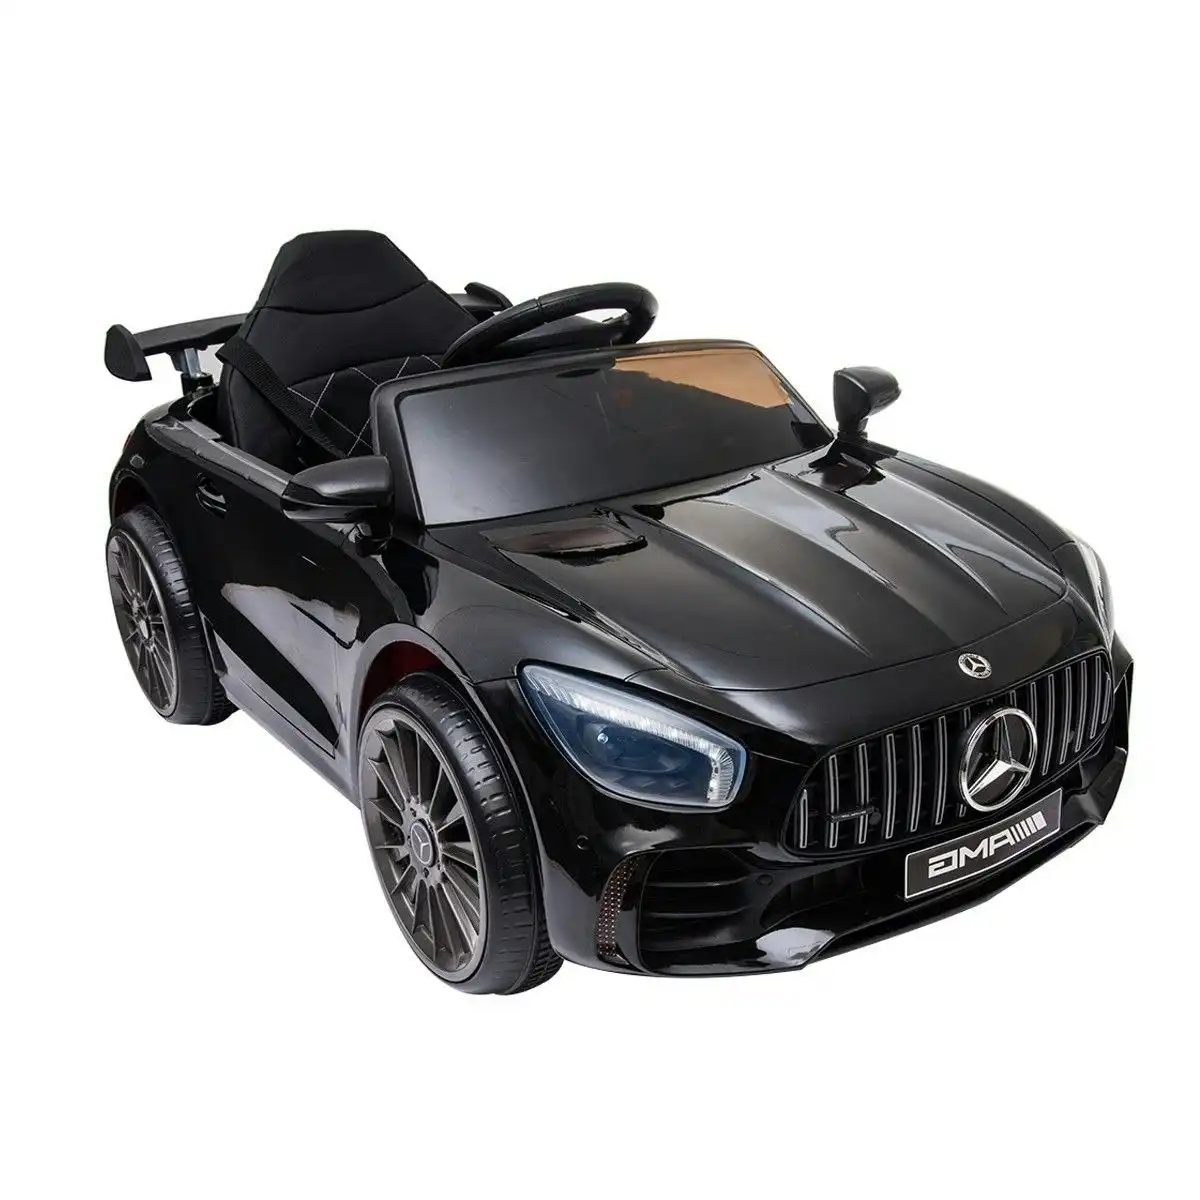 Ausway Mercedes Benz Licensed 12V Kids Ride On Car Electric Toy Car with Remote Control